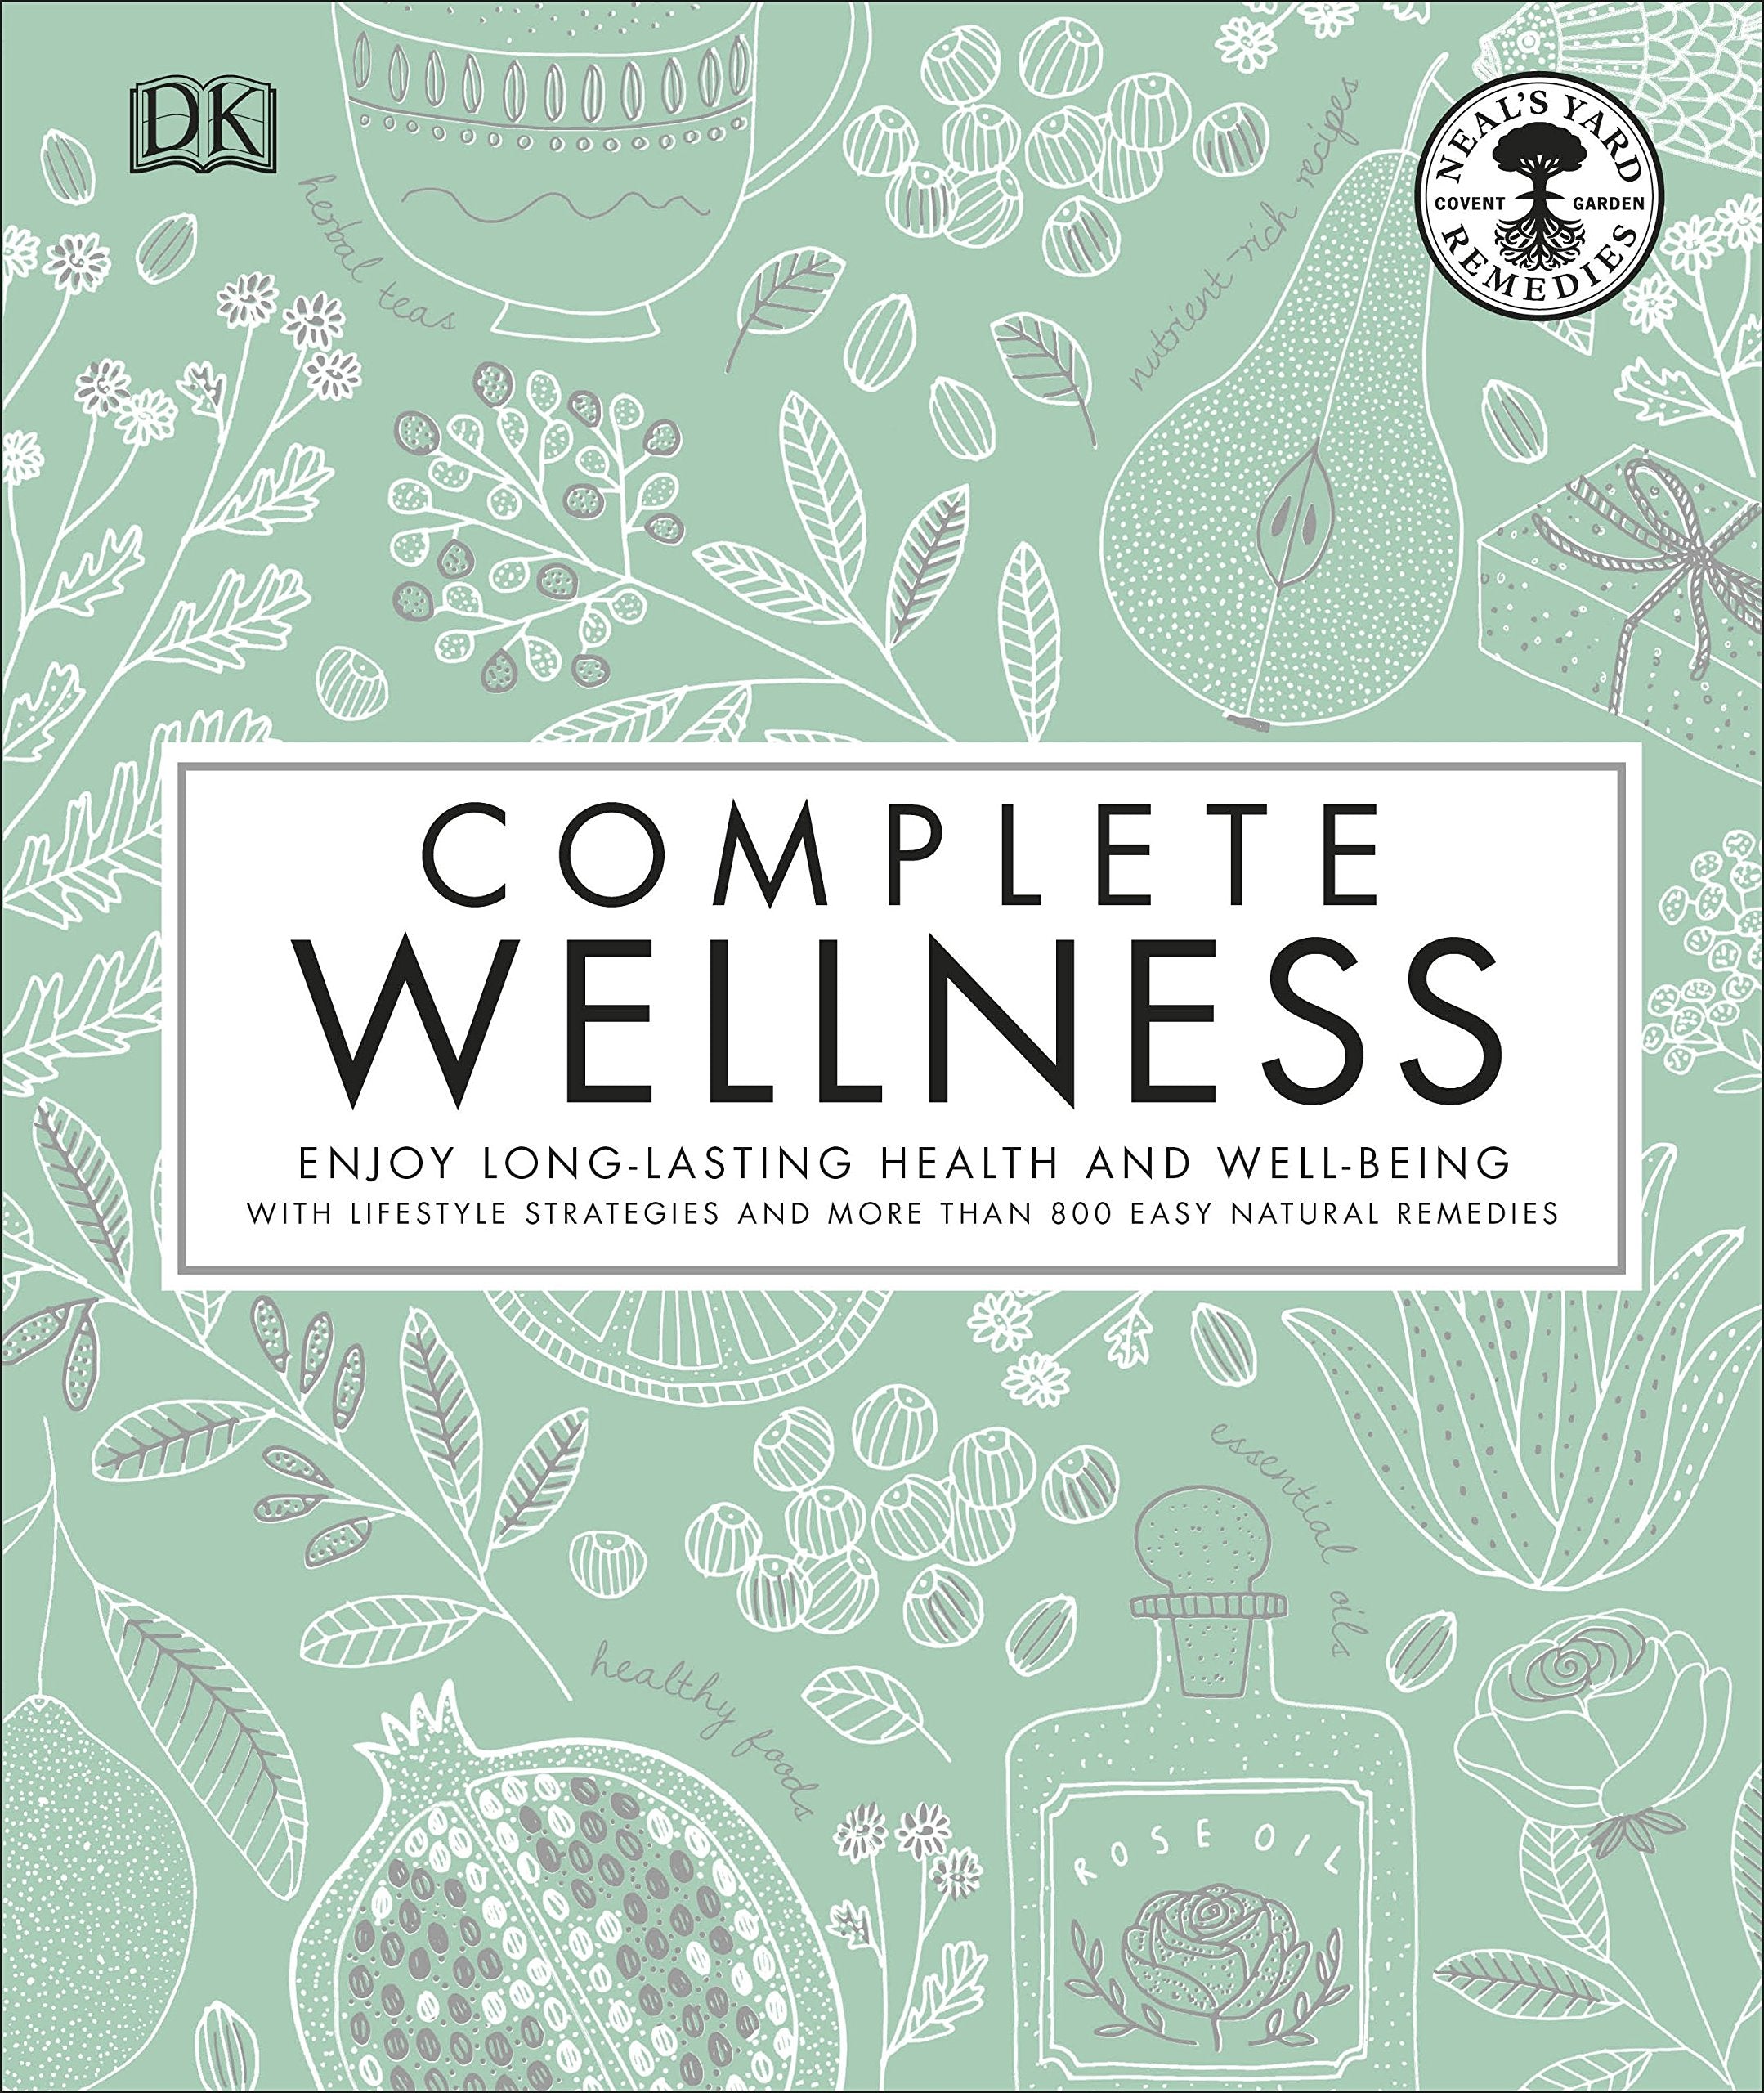 WELLNESS PRODUCTS